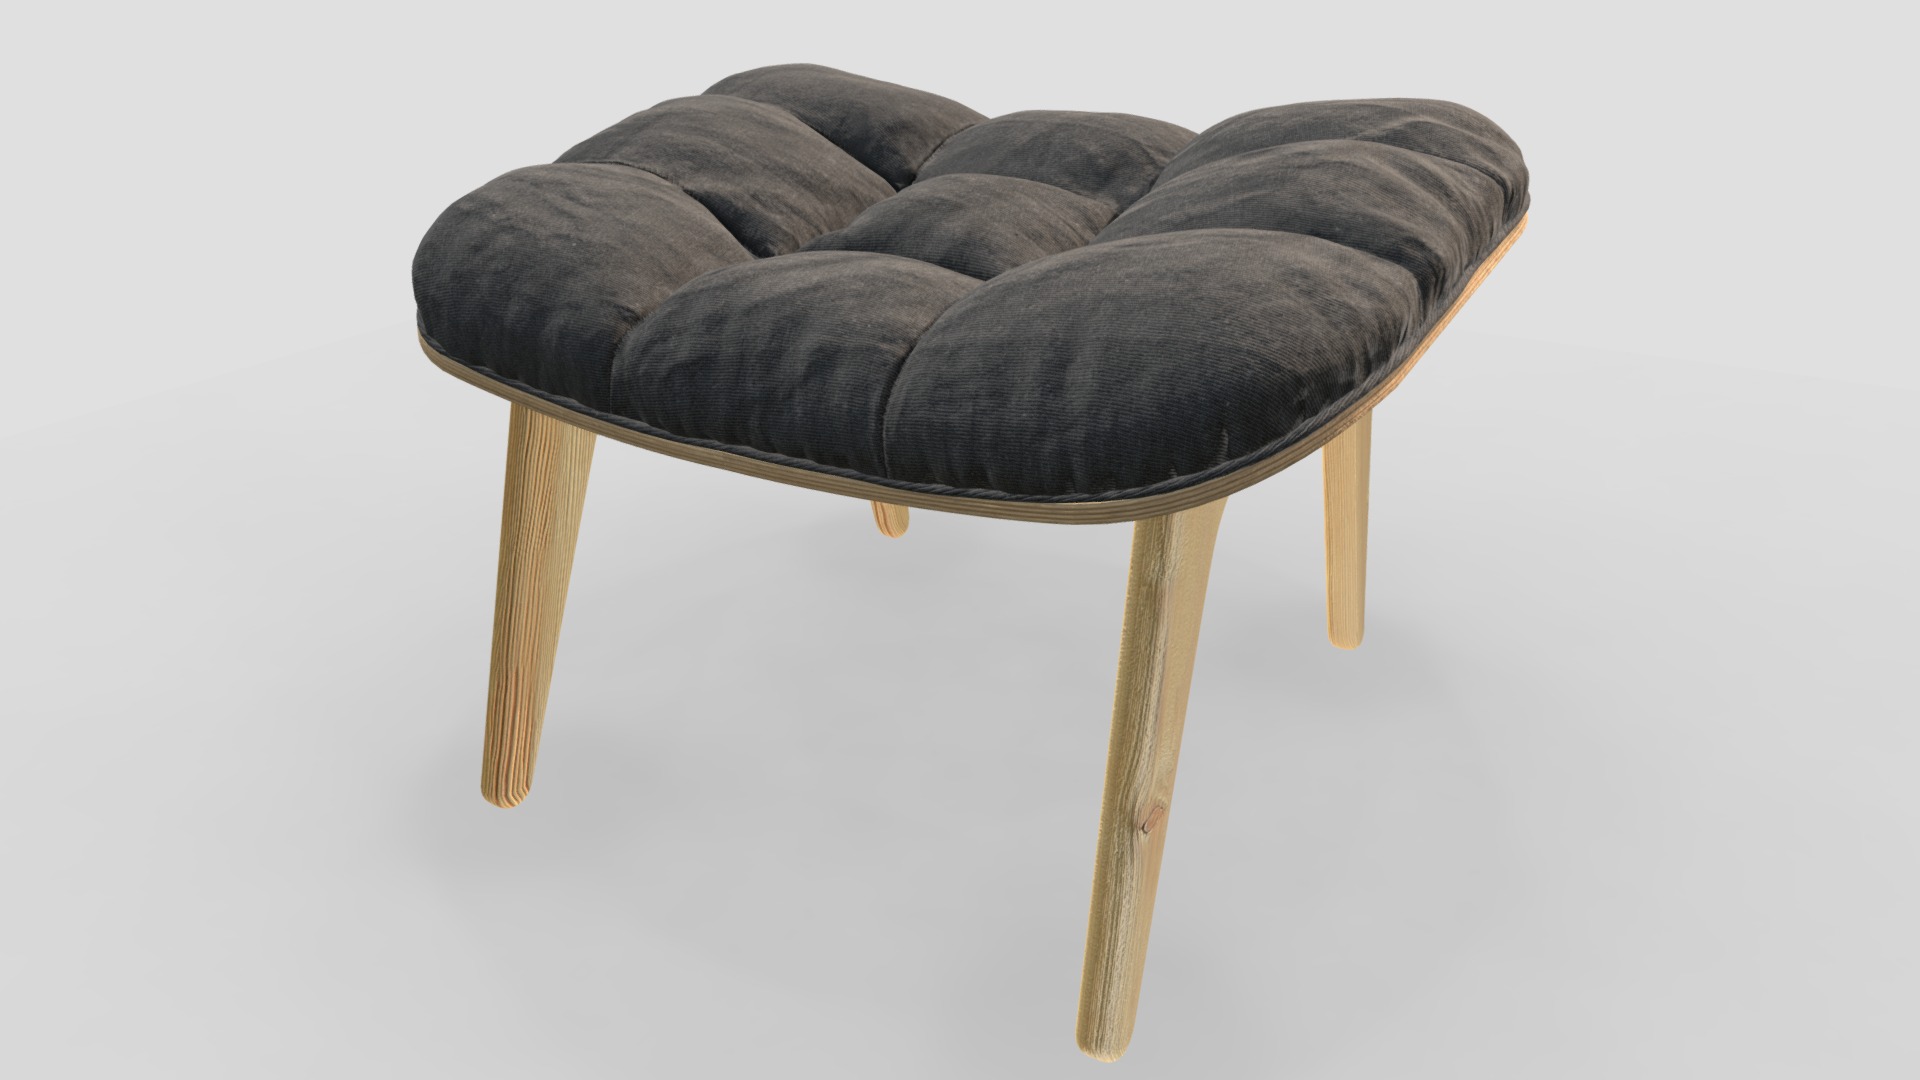 3D model Padded Chair - This is a 3D model of the Padded Chair. The 3D model is about a black chair with a cushion.